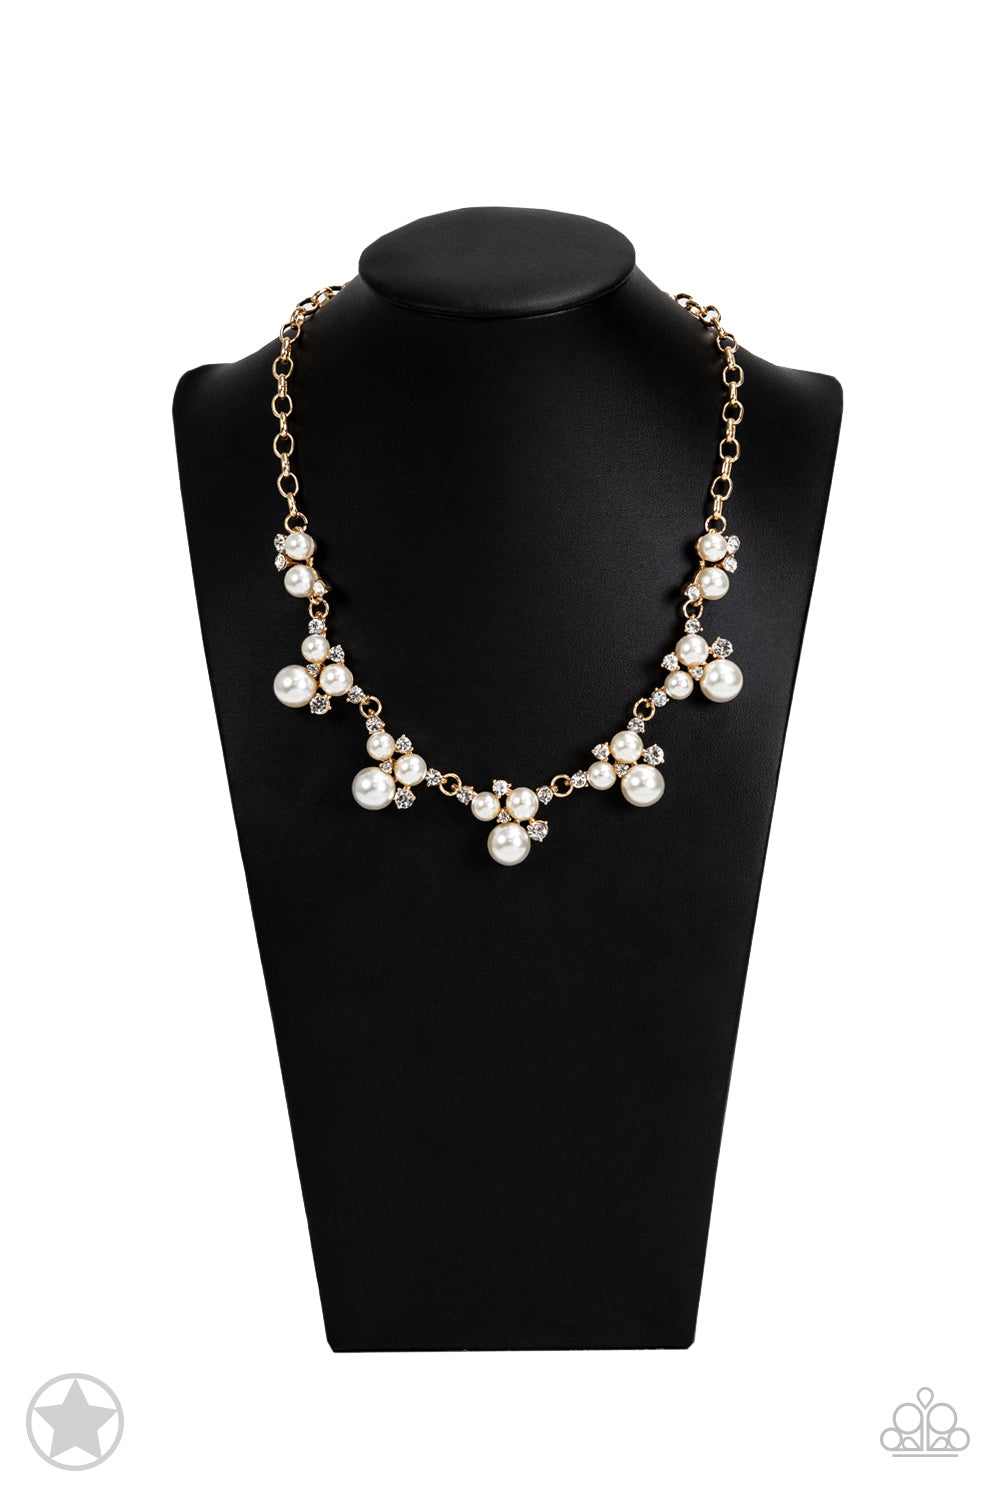 Toast To Perfection - Gold - Paparazzi necklace